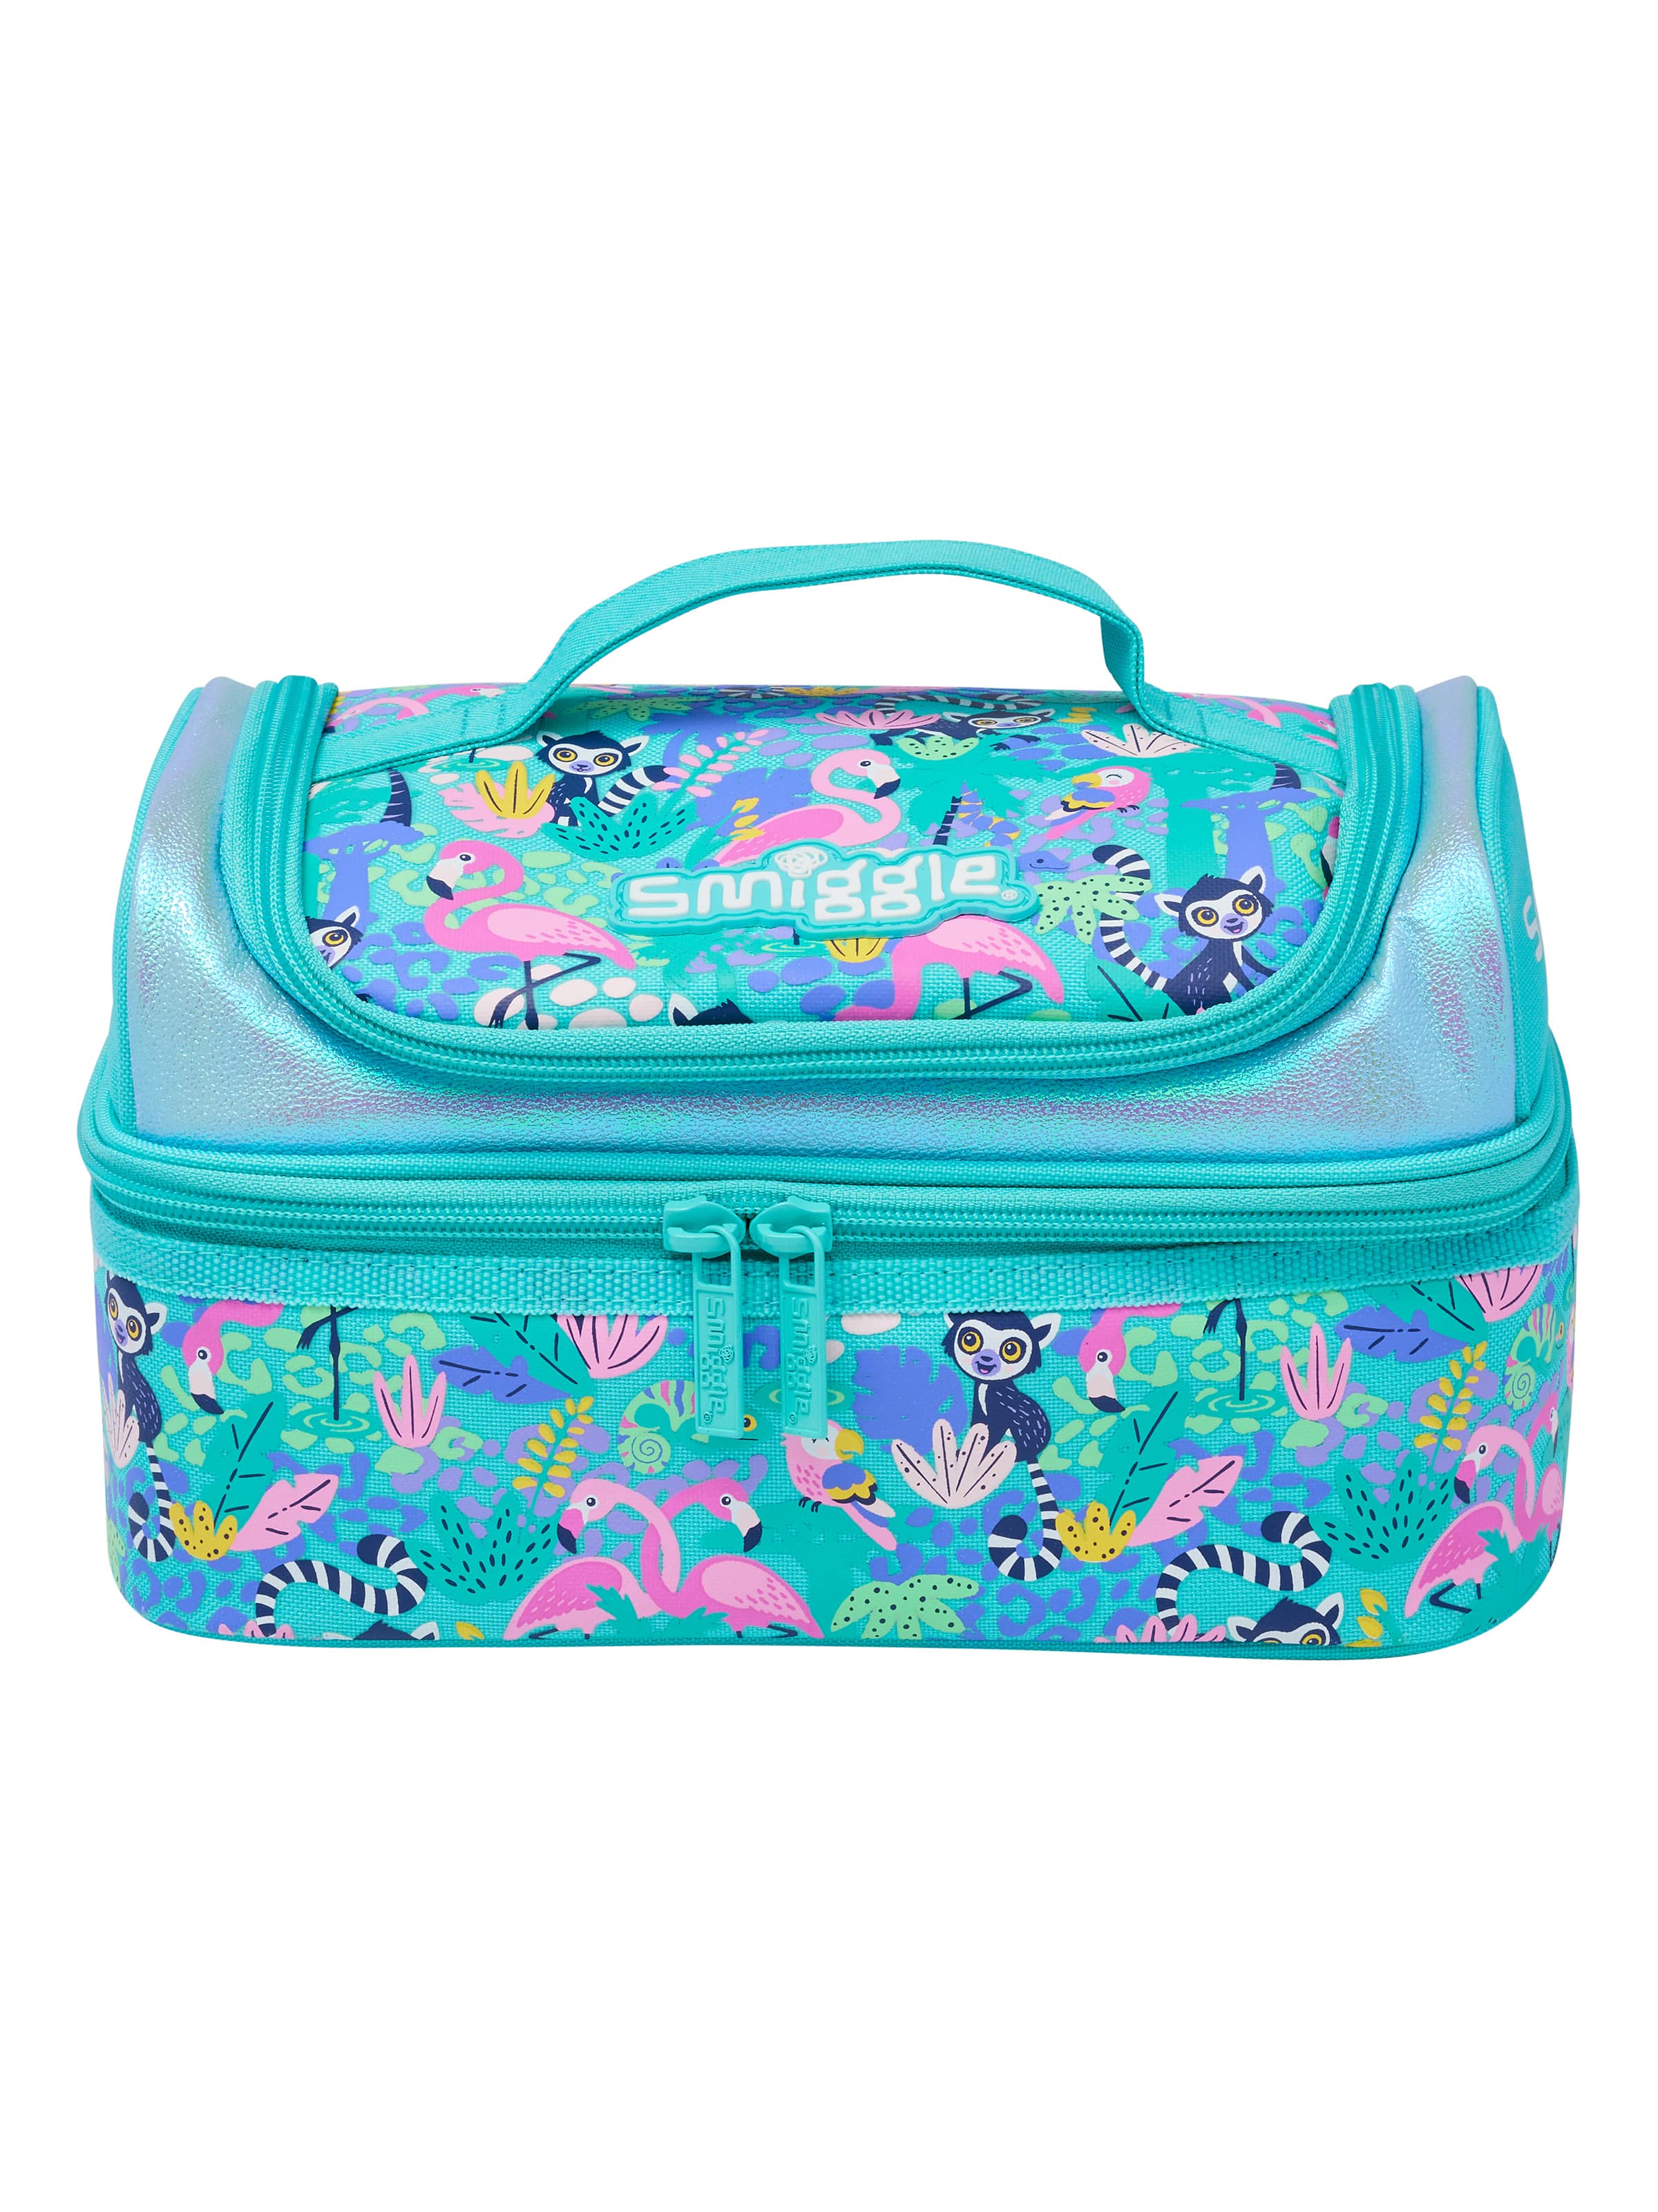 Square Divided Lunch Boxes, New Zealand, lunch box, party, DEAL OF THE  DAY